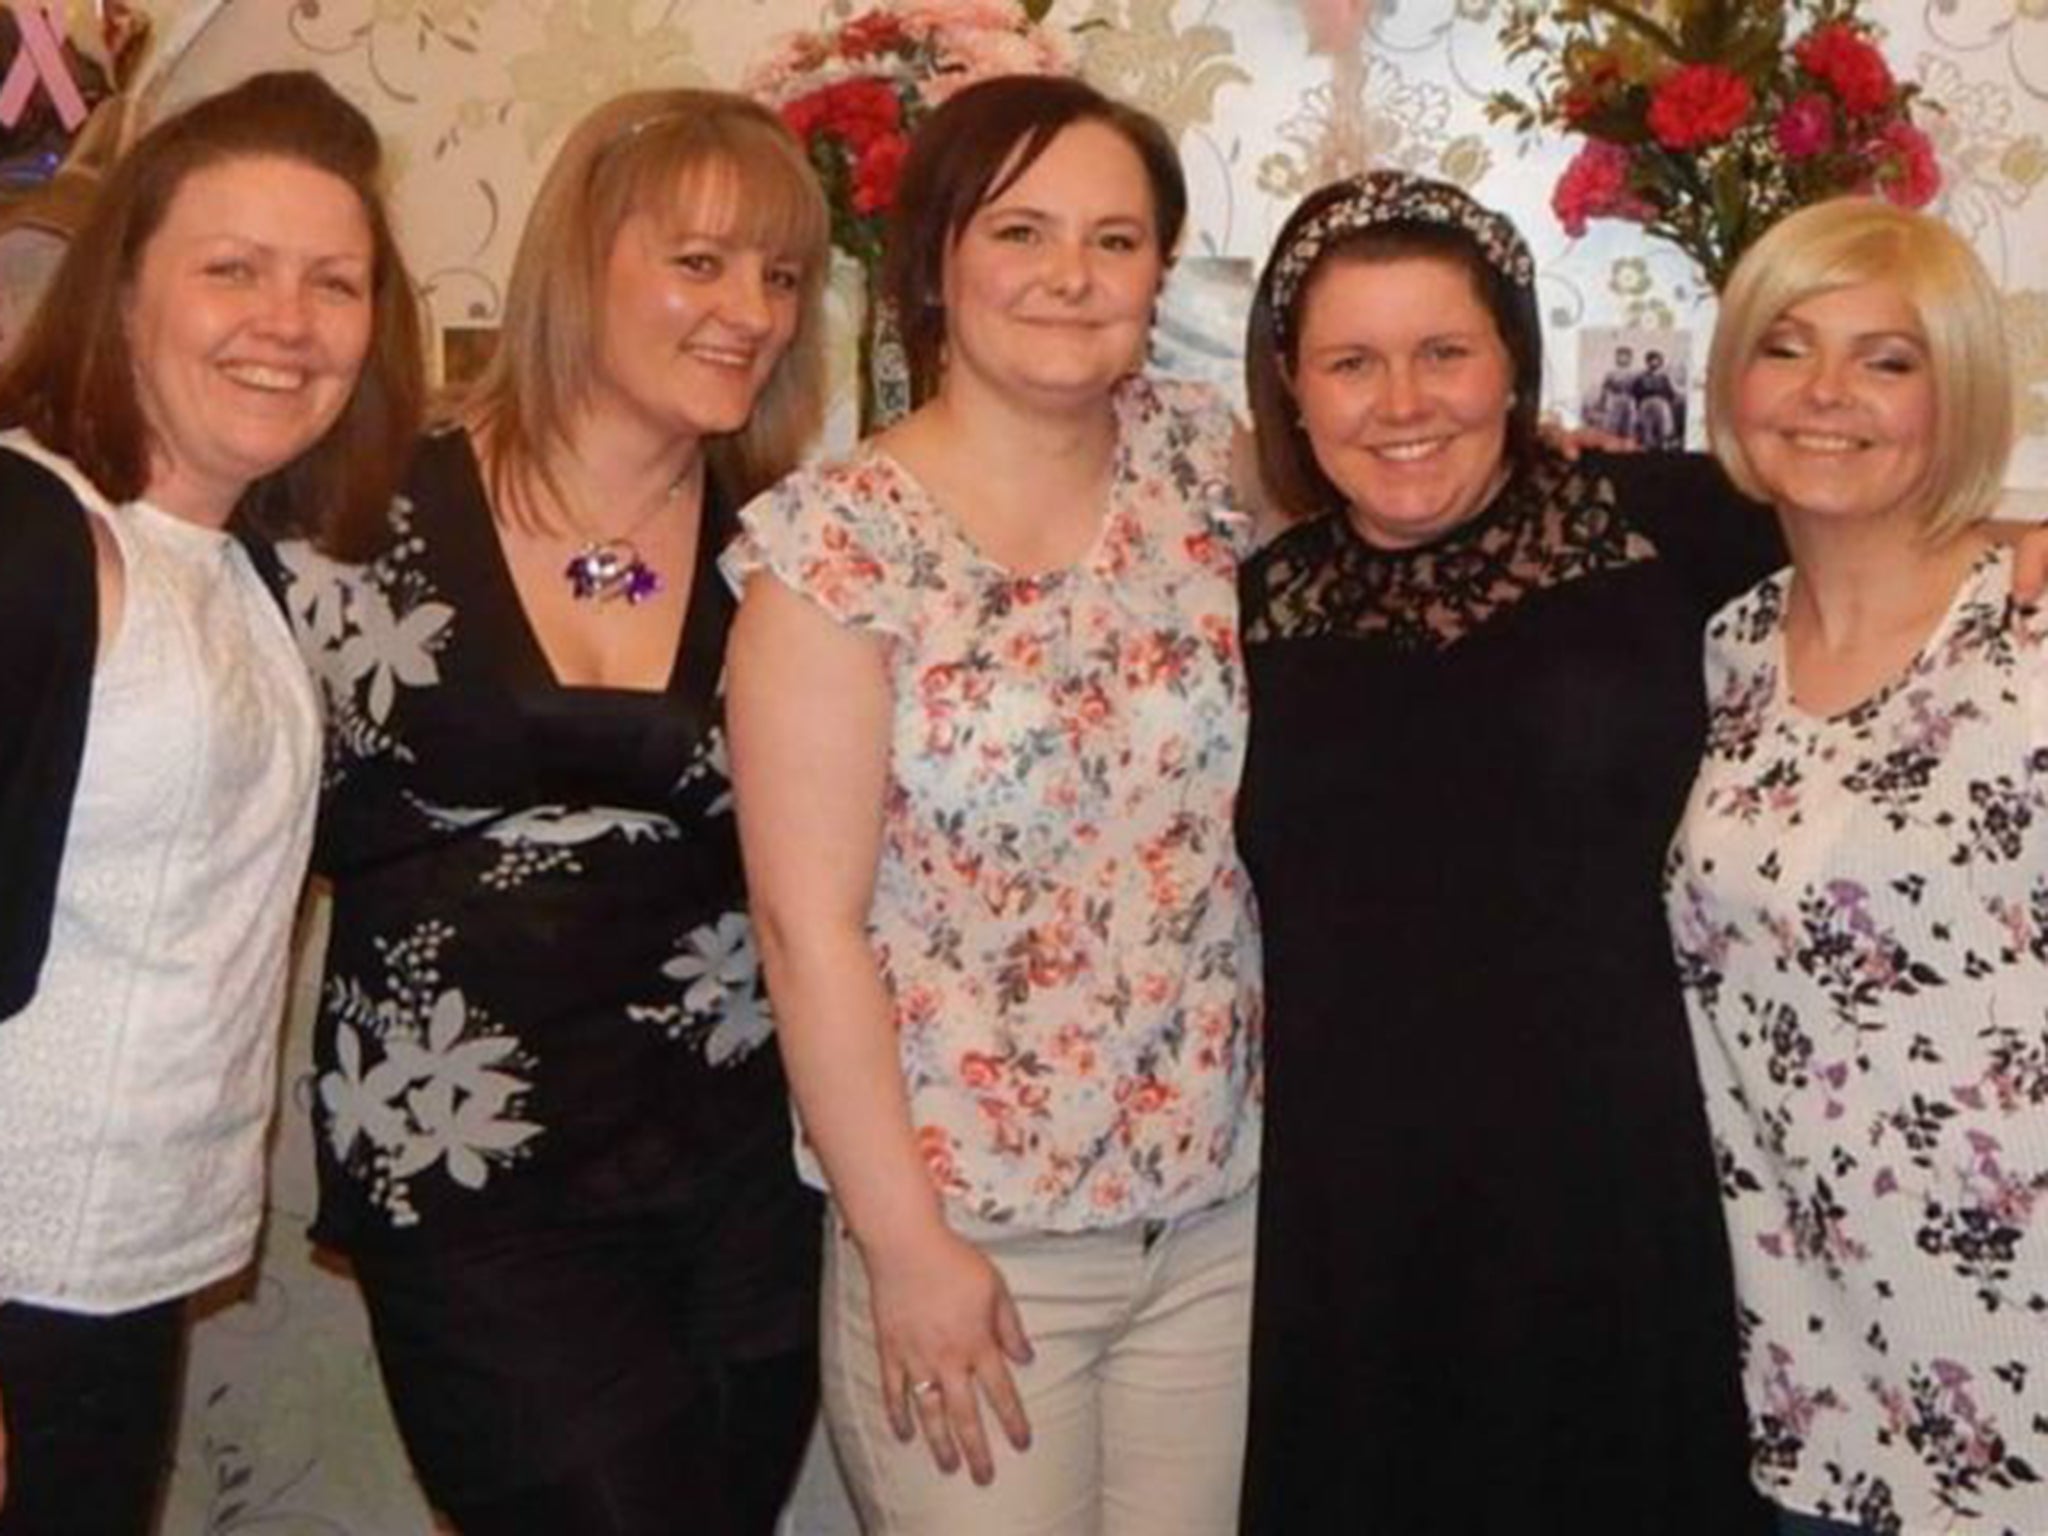 Amanda Stewart, Catherine Keeney, Yvonne McKenna, Suzanne McCormack and Laura McGuinness, cousins and mastectomy patients